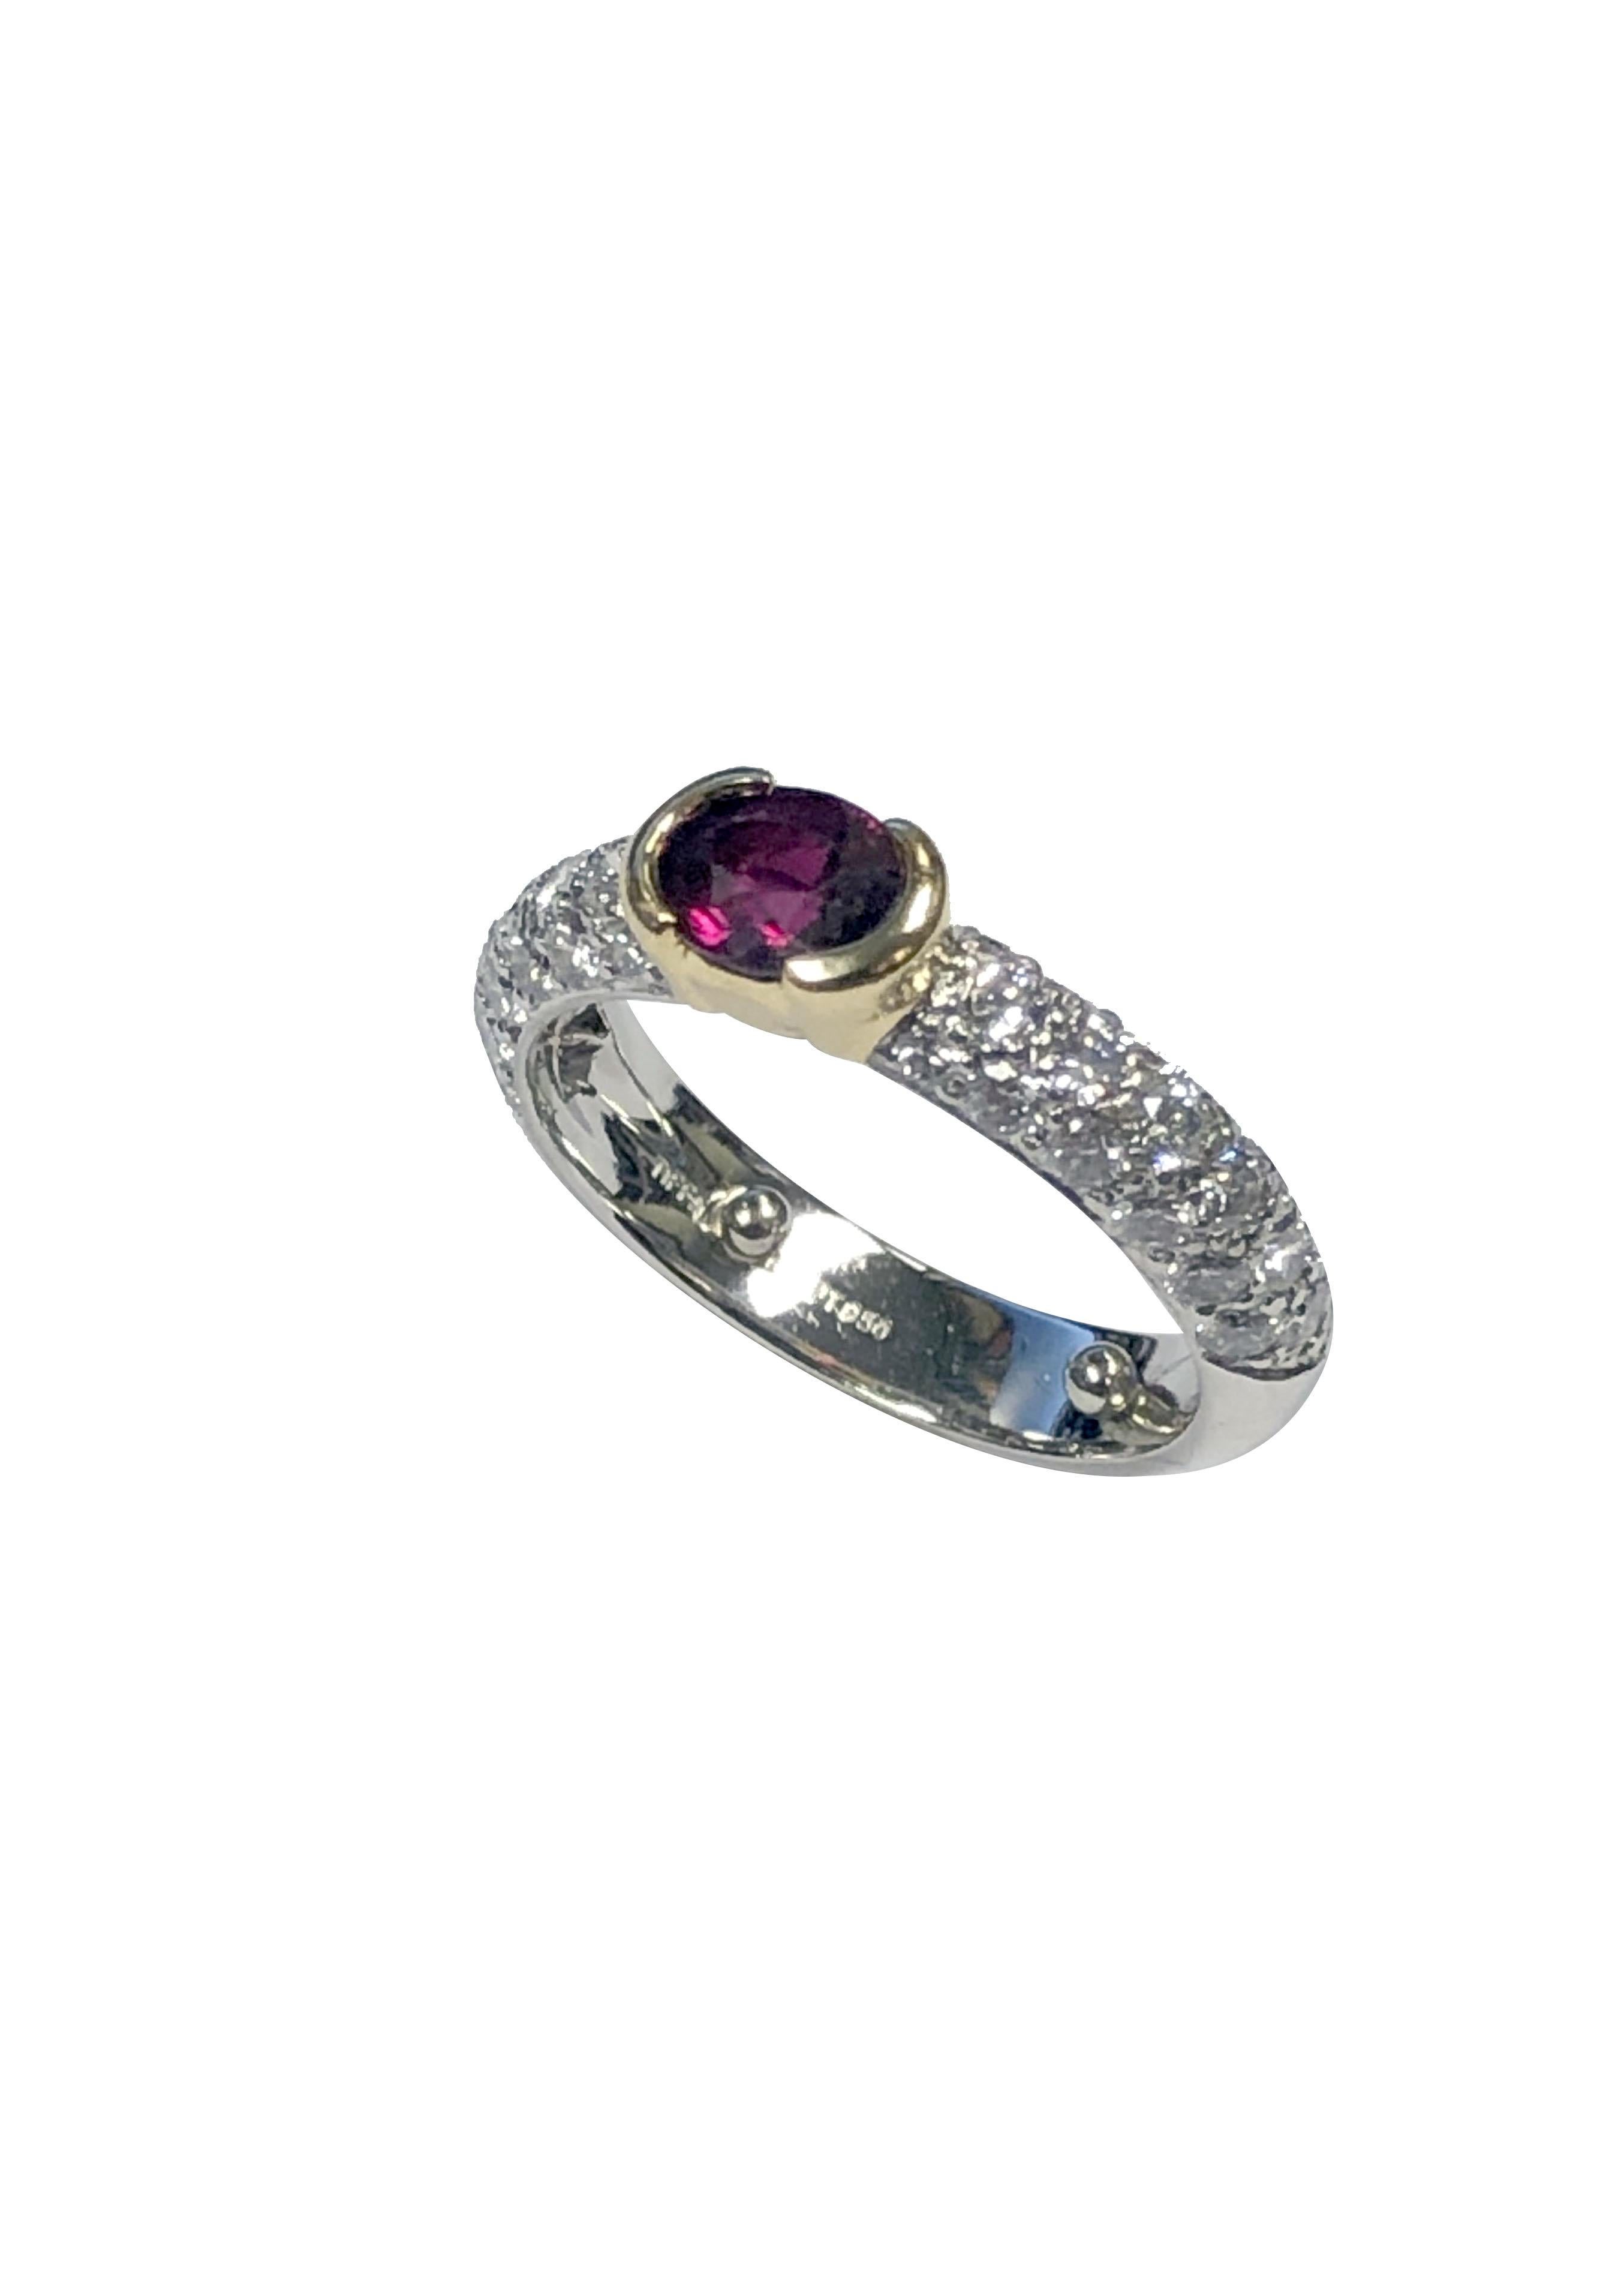 Tiffany & Company Platinum Diamond and Ruby Ring In Excellent Condition For Sale In Chicago, IL